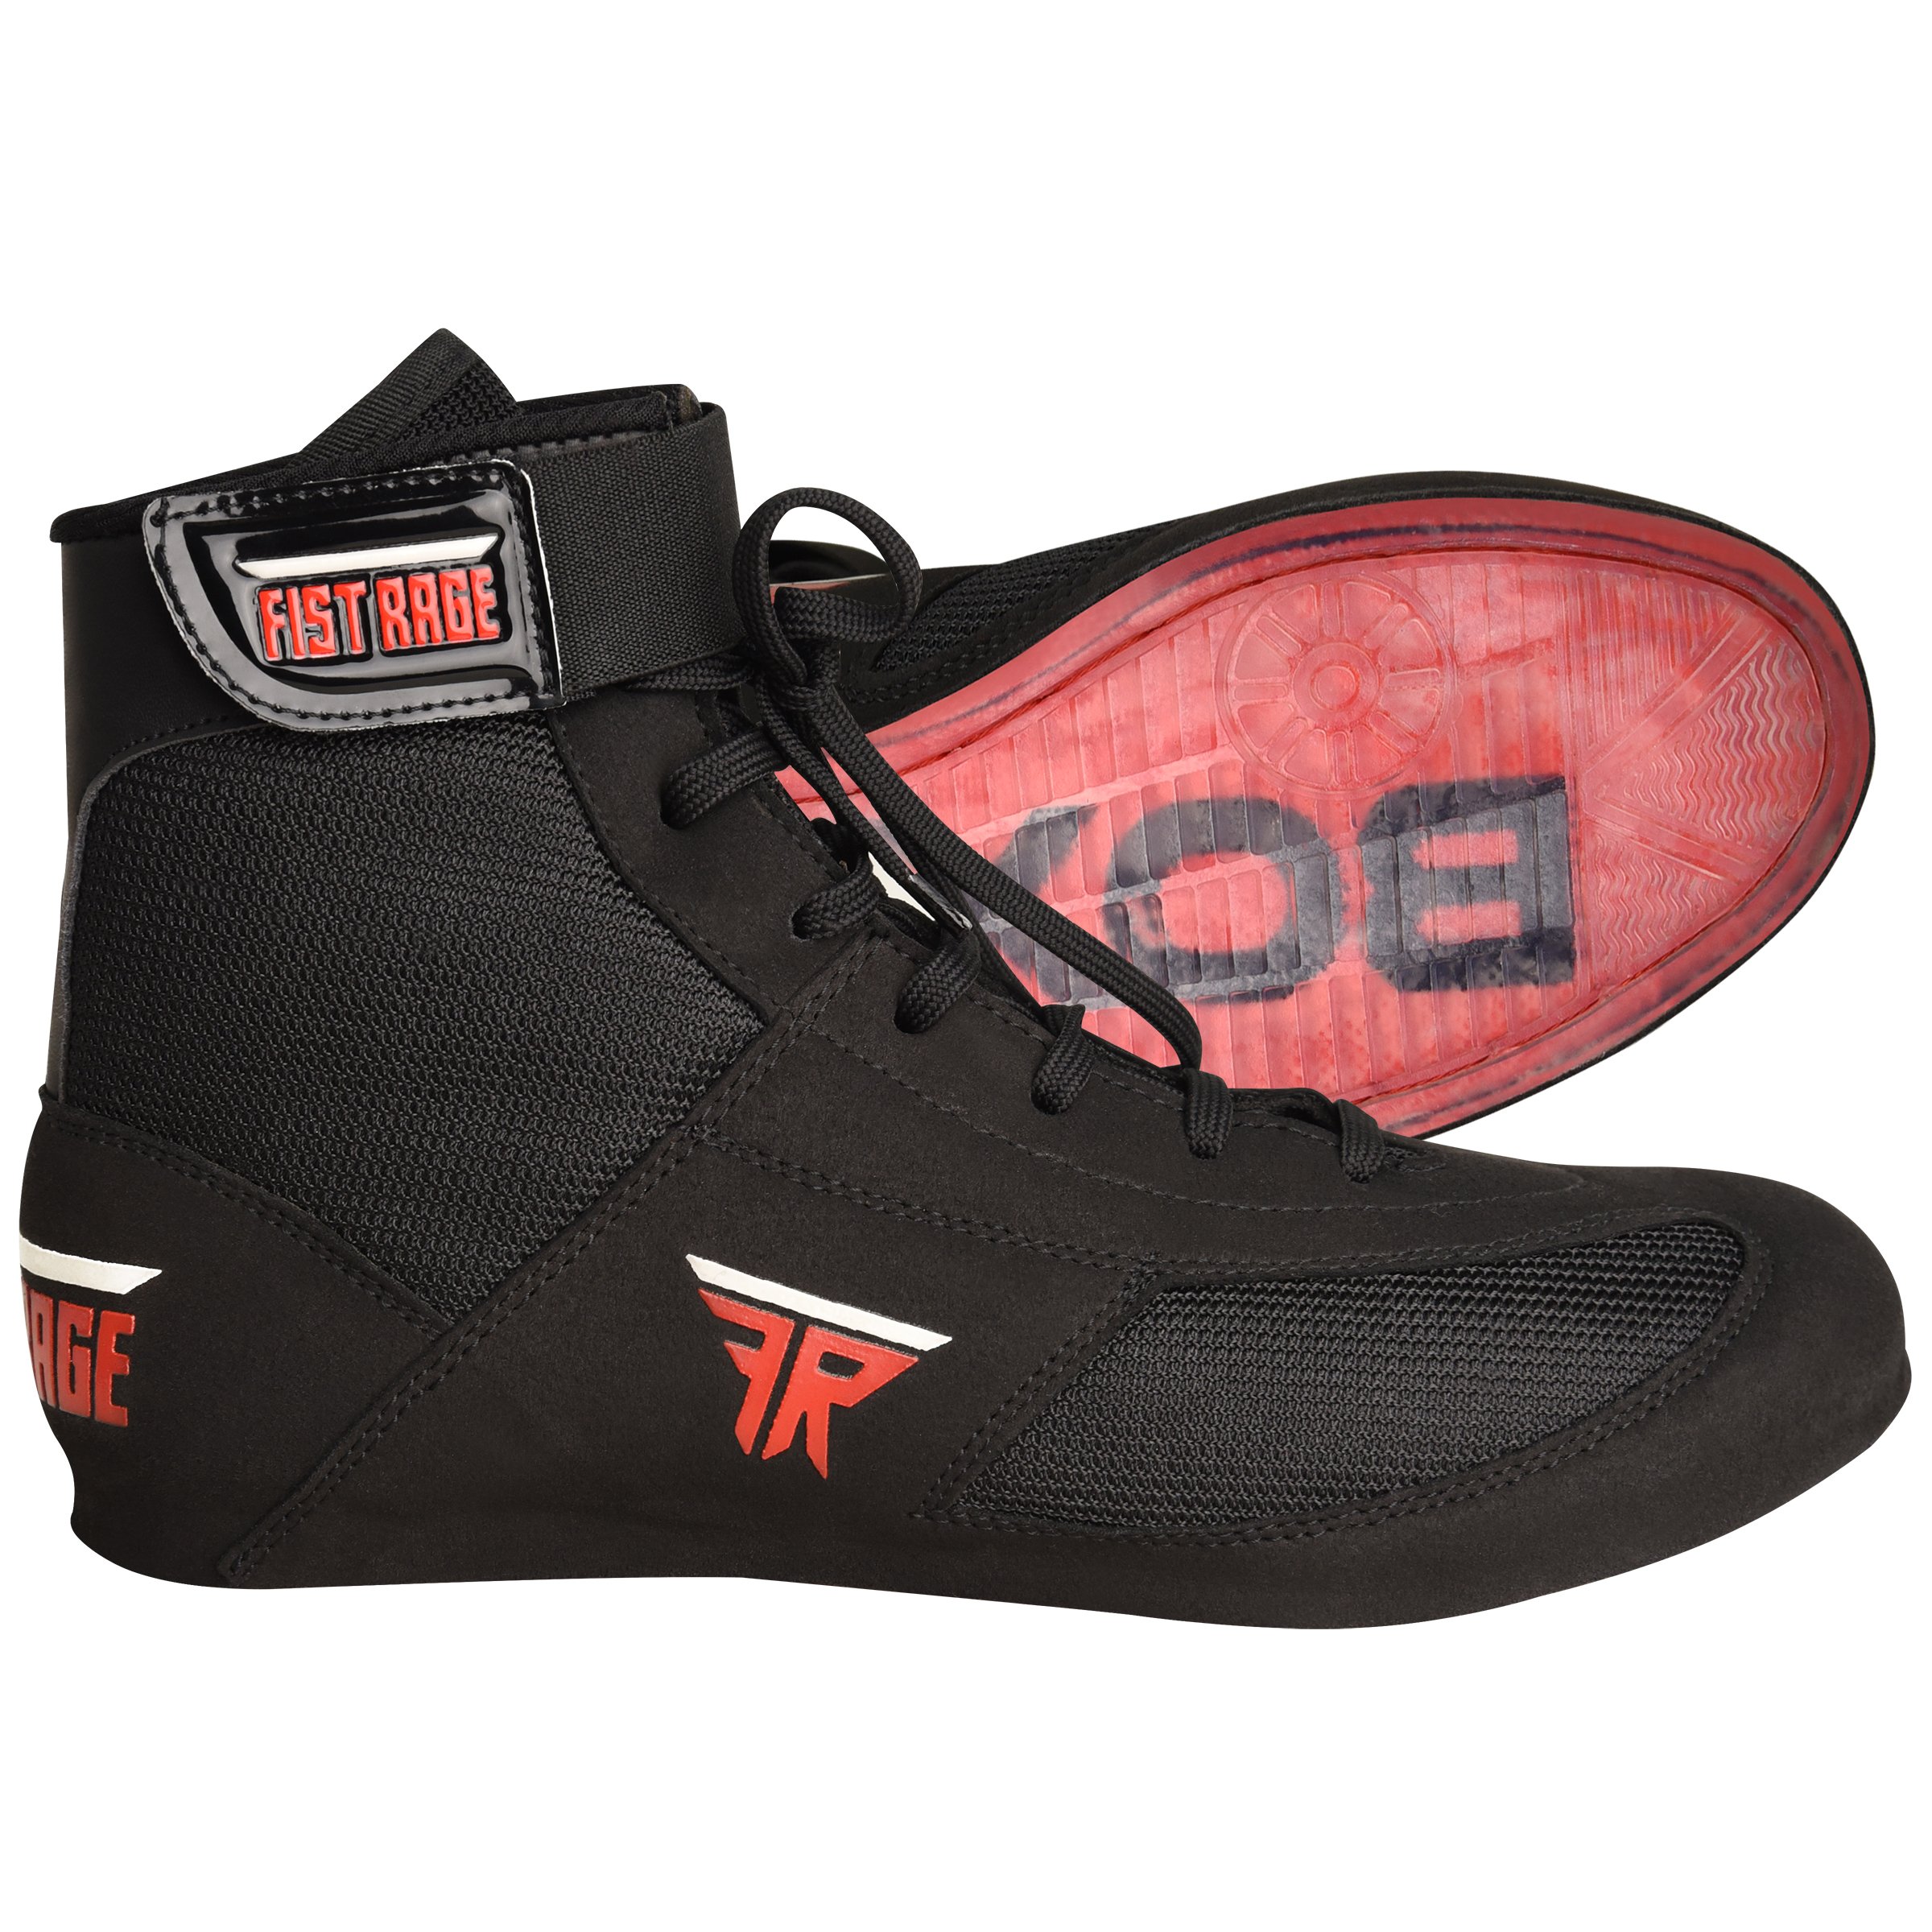 FISTRAGE HALF BOXING SHOES - image 1 of 8